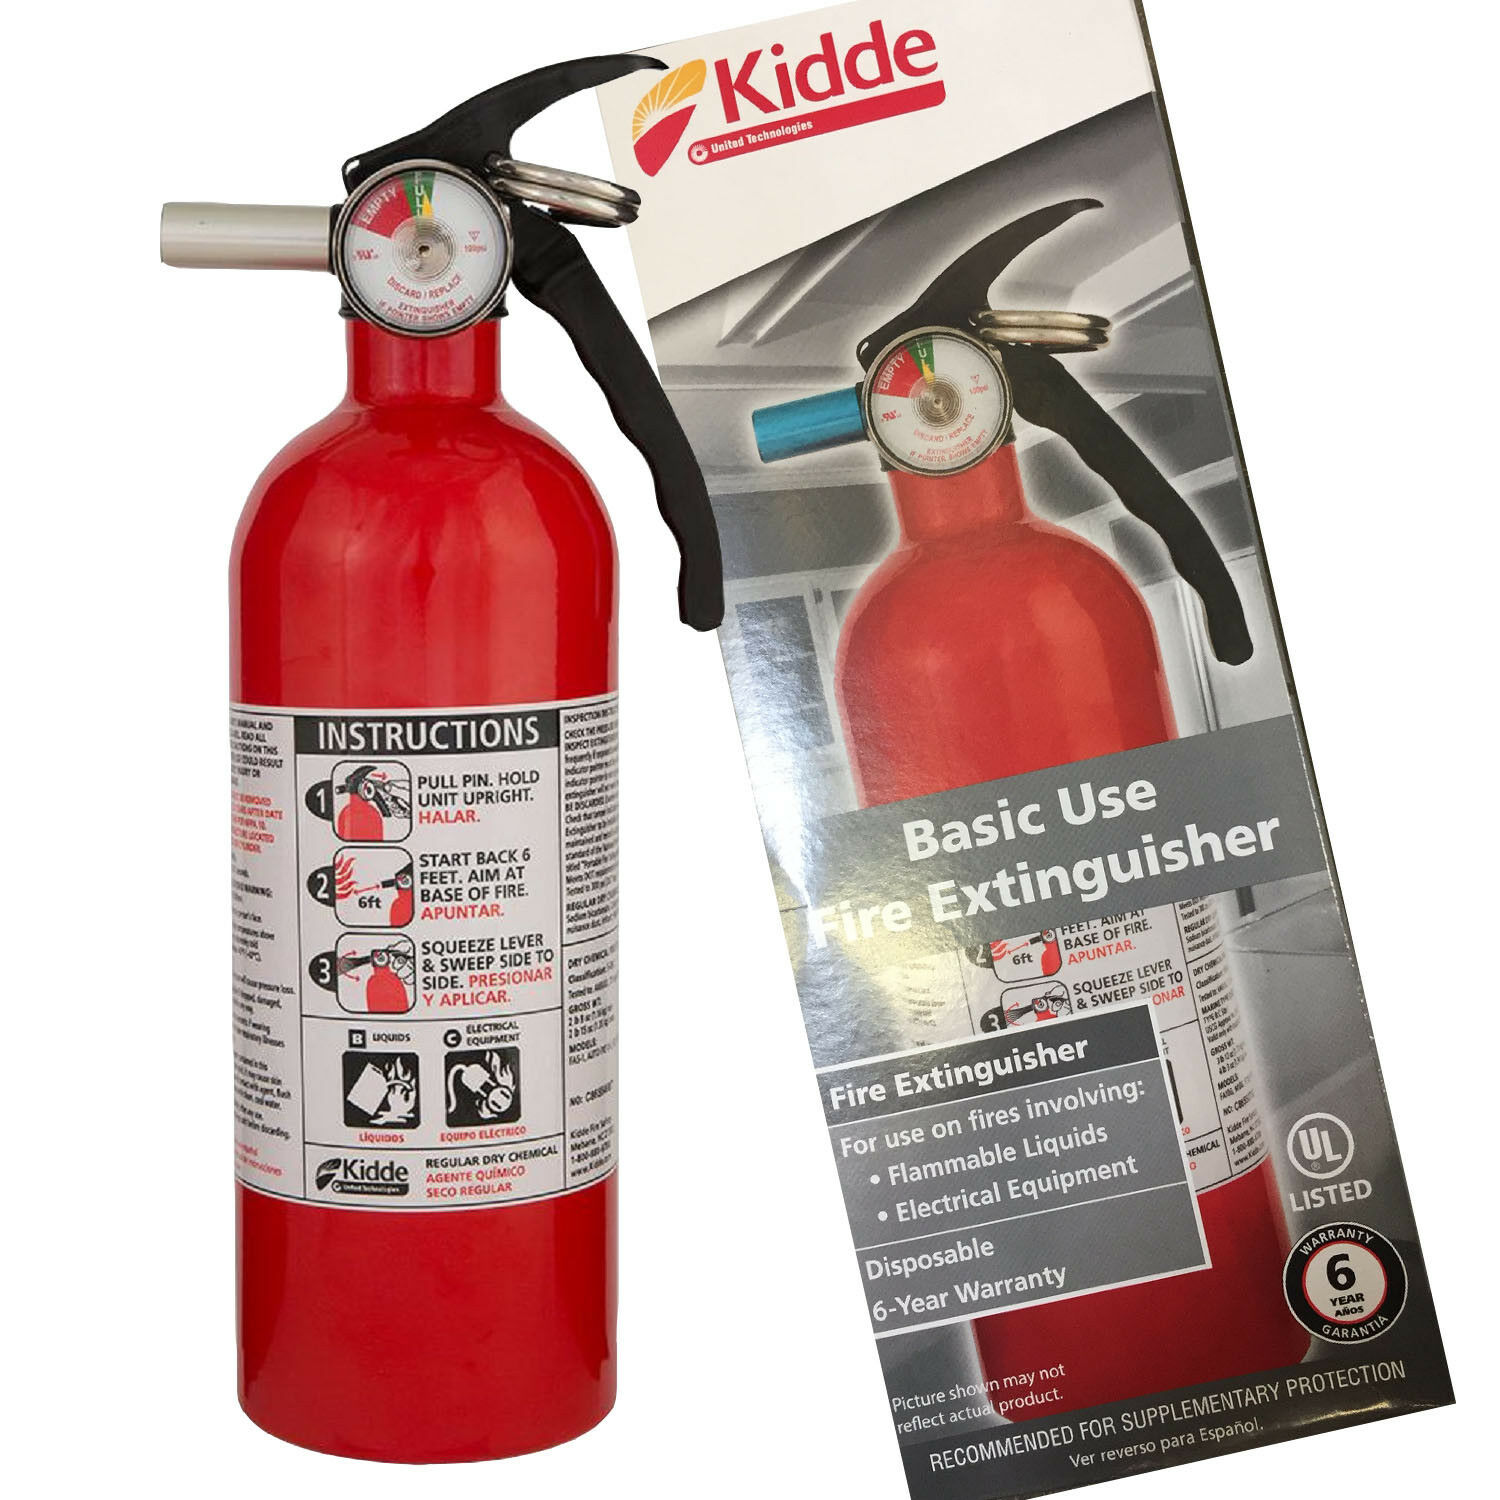 Kidde Dry Chemical Fire Extinguisher Home Car Auto Garage Kitchen Safety 5-b:c